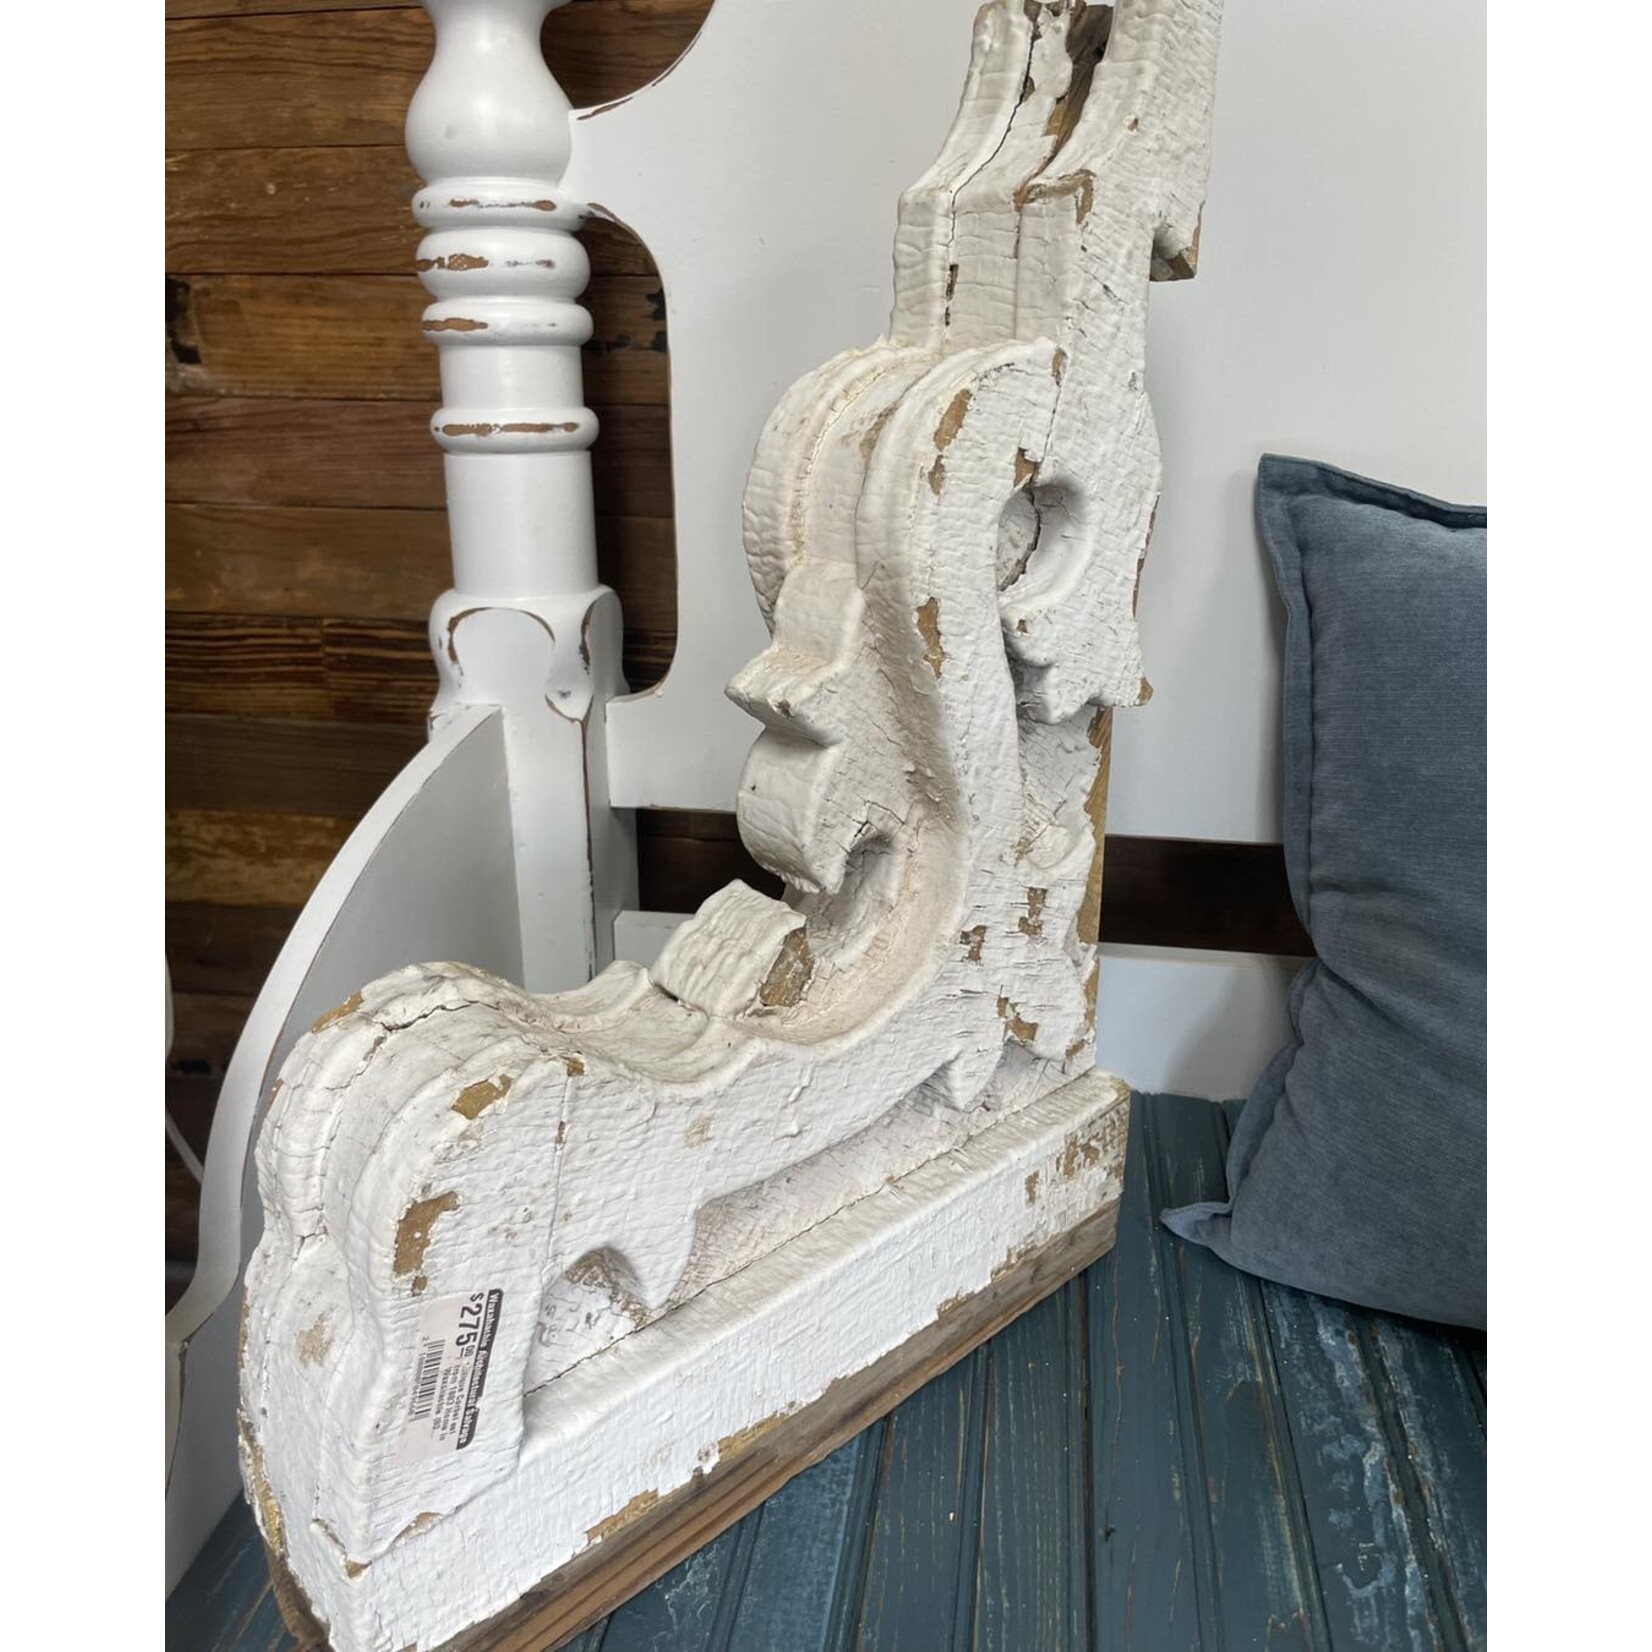 Antique Corbel set from 1883 Home in Waxahachie (808 W. Main)